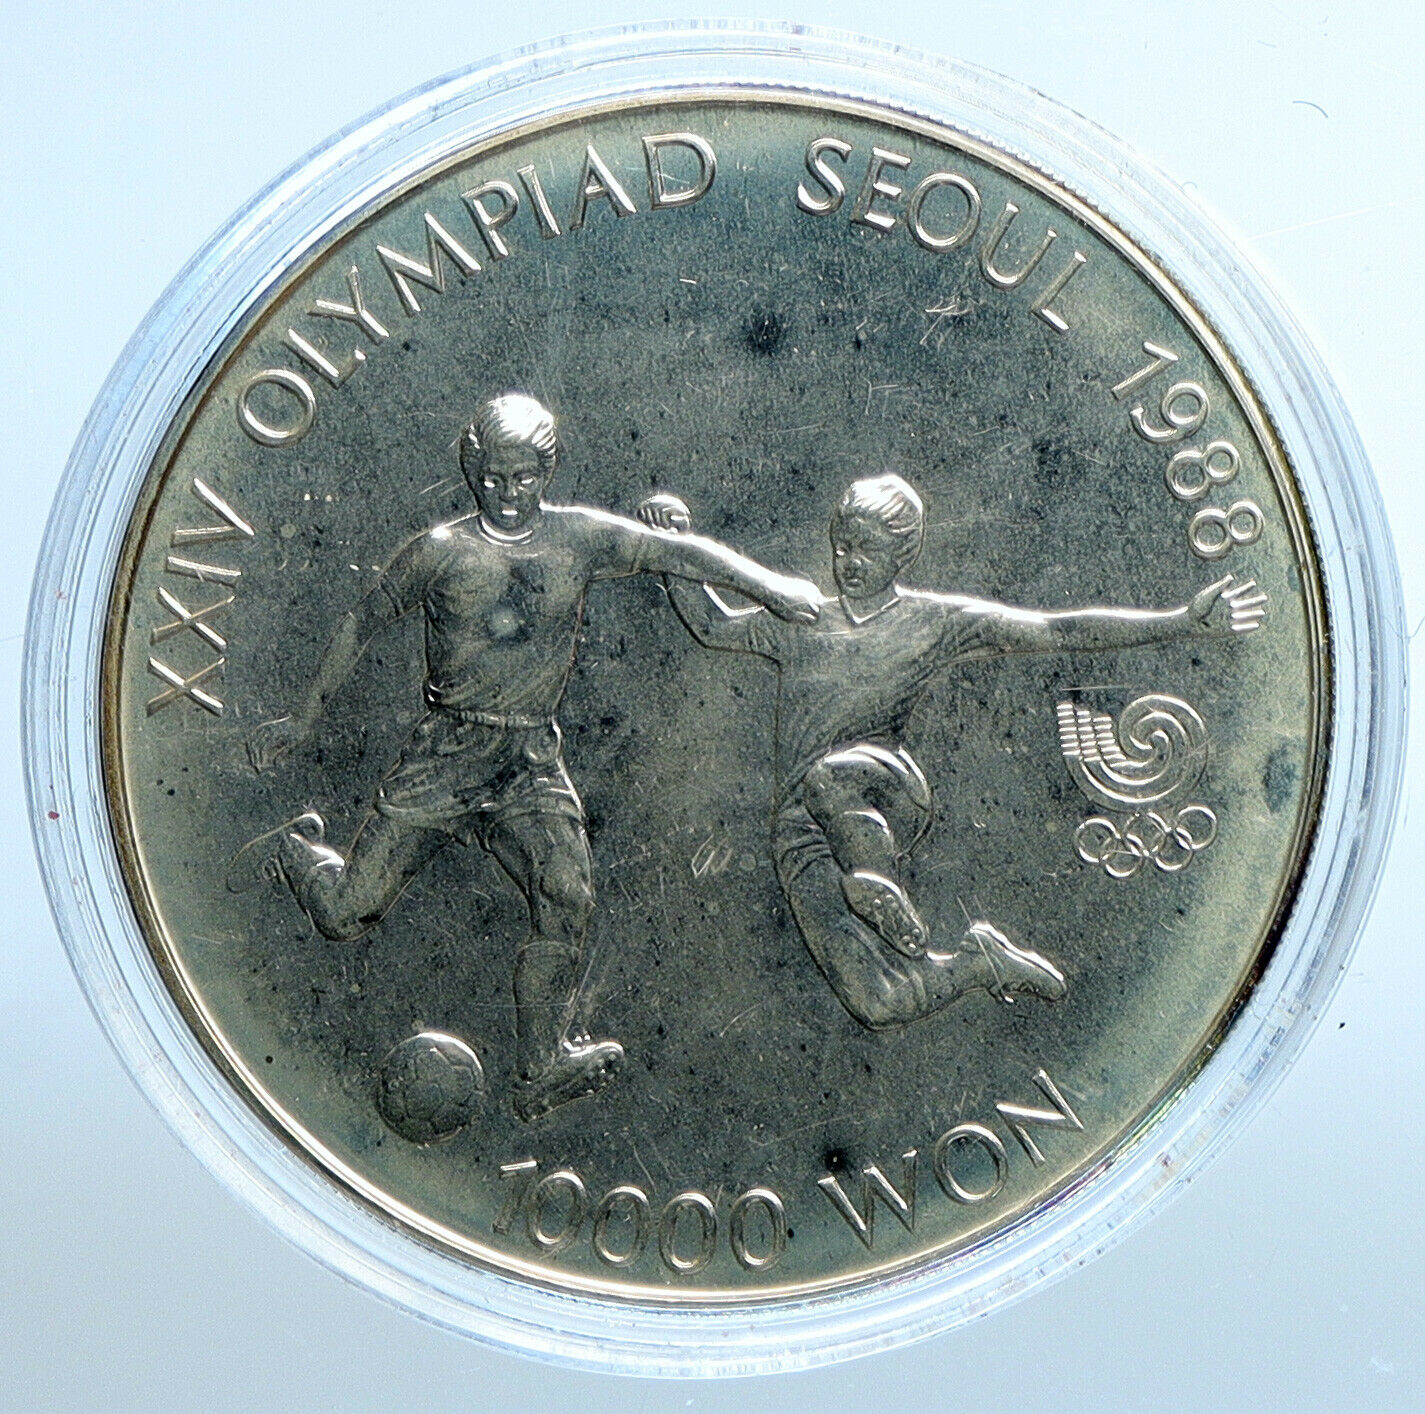 1987 SOUTH KOREA Seoul OLYMPIC Volleyball Old Silver 10000 Won Coin i111176